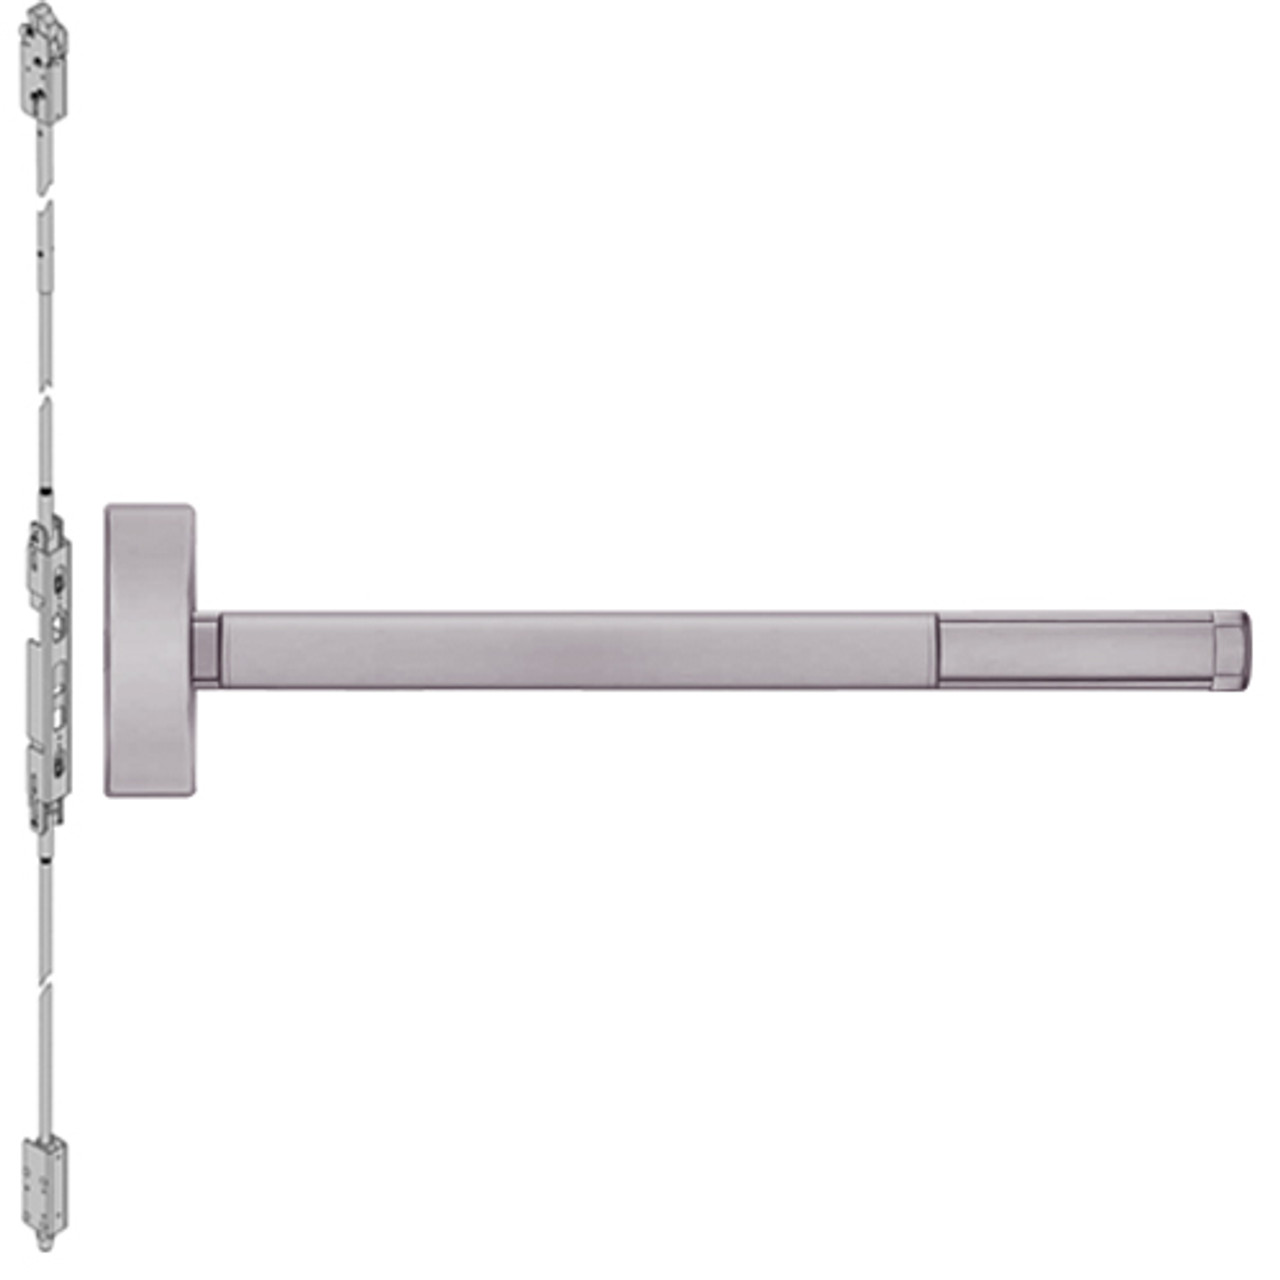 2808-630-36 PHI 2800 Series Non Fire Rated Concealed Vertical Rod Exit Device Prepped for Key Controls Lever-Knob in Satin Stainless Steel Finish